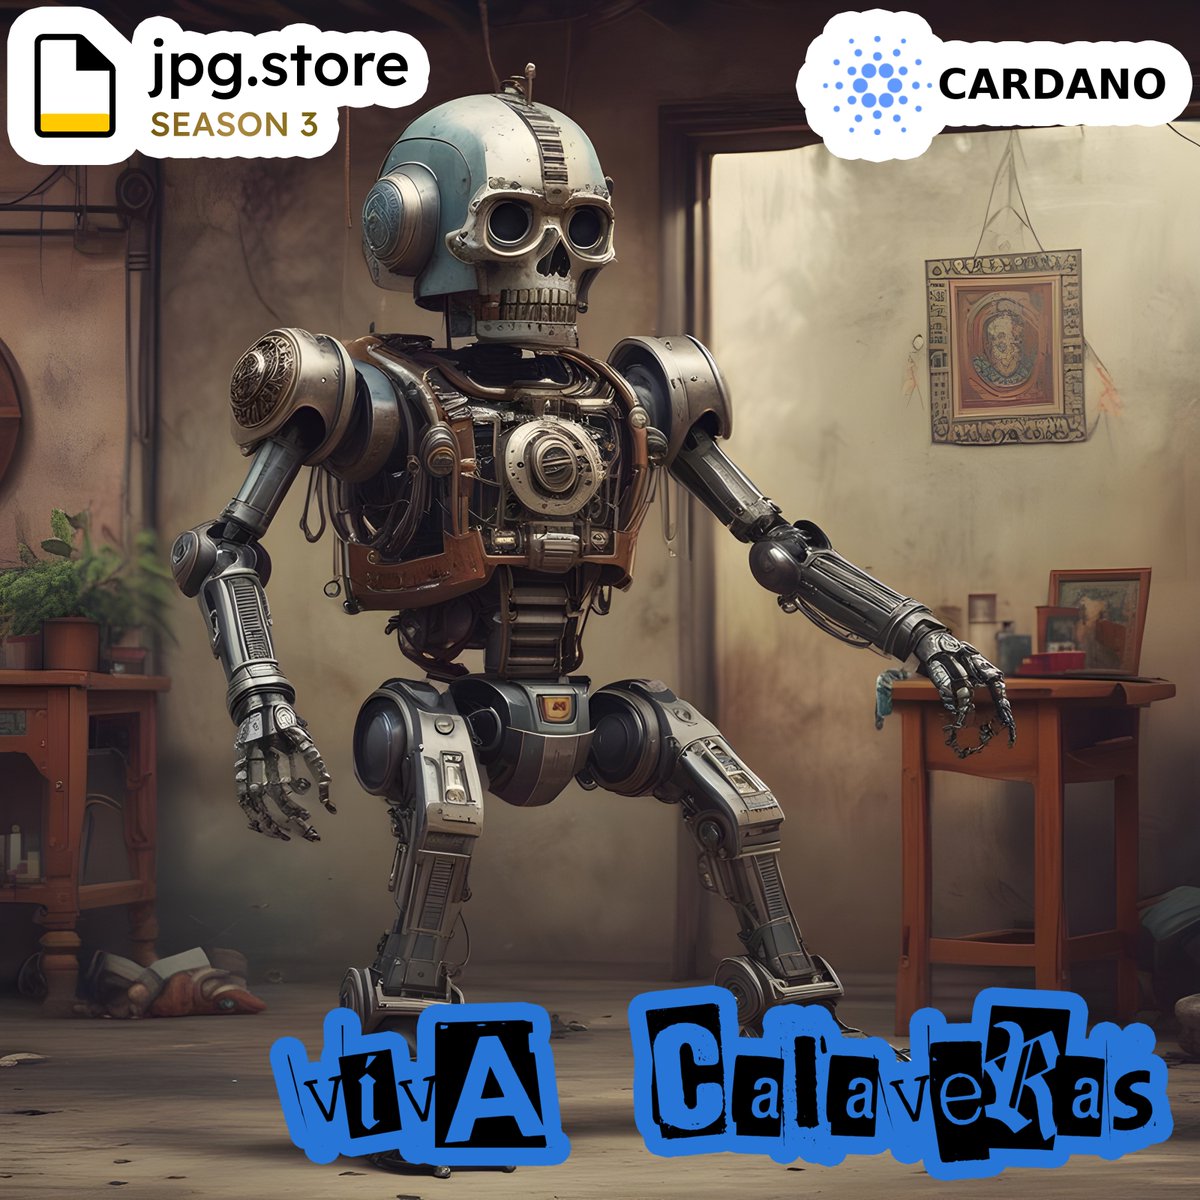 Viva Calaveras on Cardano via jpg.store ! These NFTs can be redeemed for a signed 3D printed K-SCOPES® Trading Card.

DOM-109
jpg.store/listing/226772…

#cardano #ADA #CardanoNFT #NFT #vivacalaveras #calaveras #kscopes #tradingcards #3dprinting #AI #AImusic